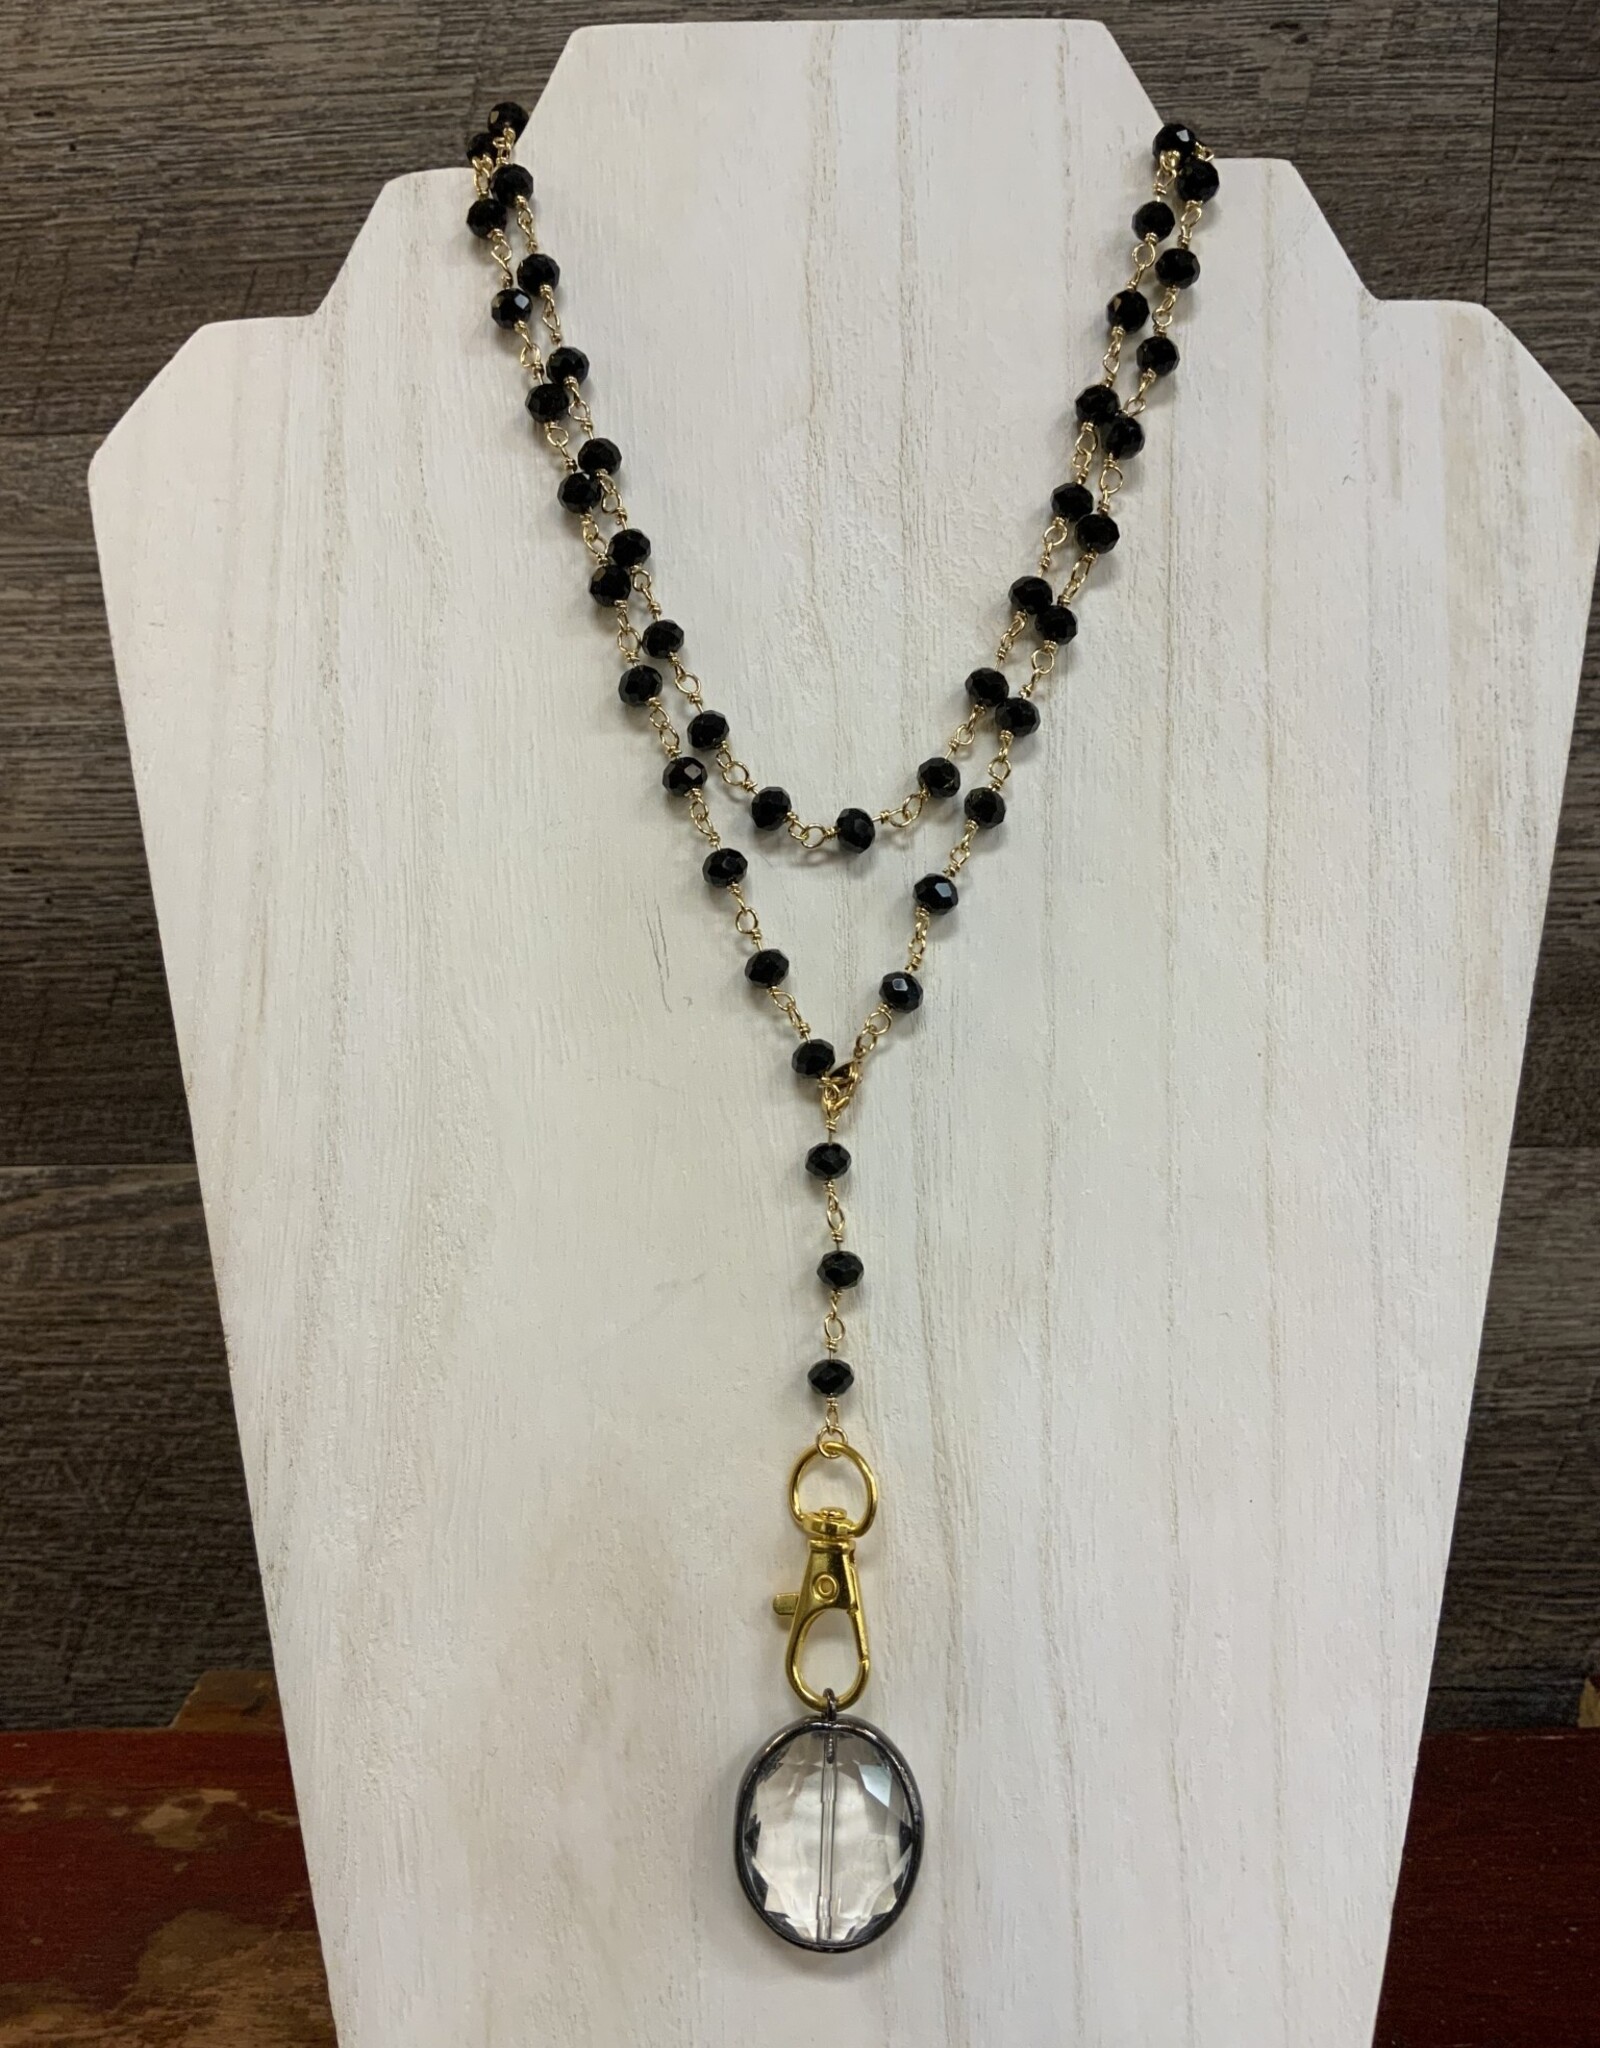 Gold w/Black Beaded Loop Around Chain w/Crystal Pendant Adjustable Necklace